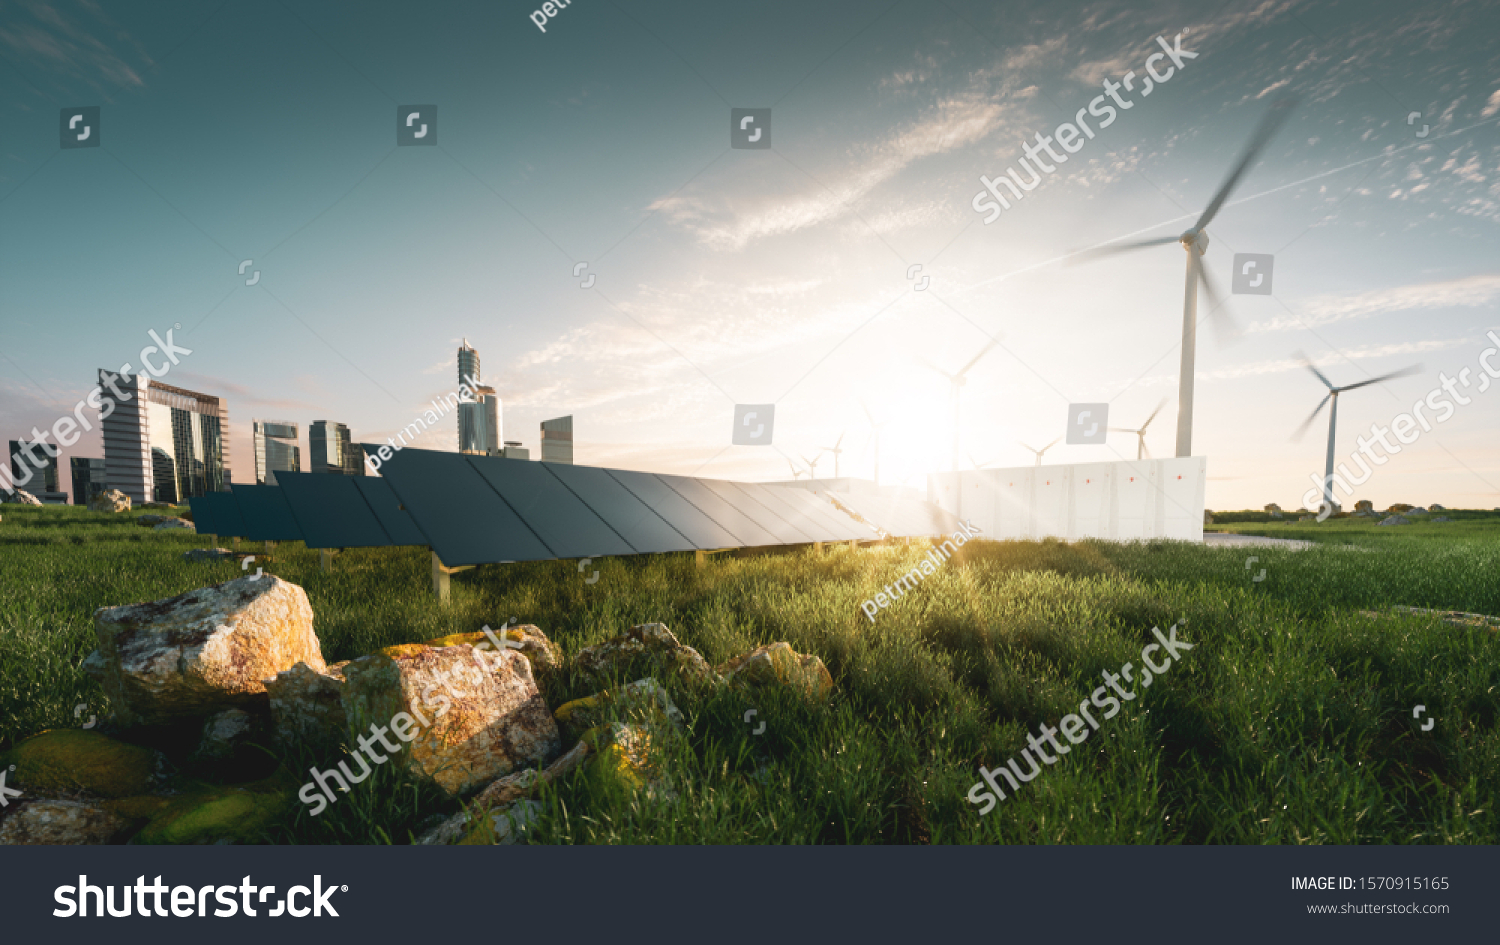 Concept of sustainable energy solution in beautifull sunset backlight. Frameless solar panels, battery energy storage facility, wind turbines and big city with skycrapers in background.  #1570915165